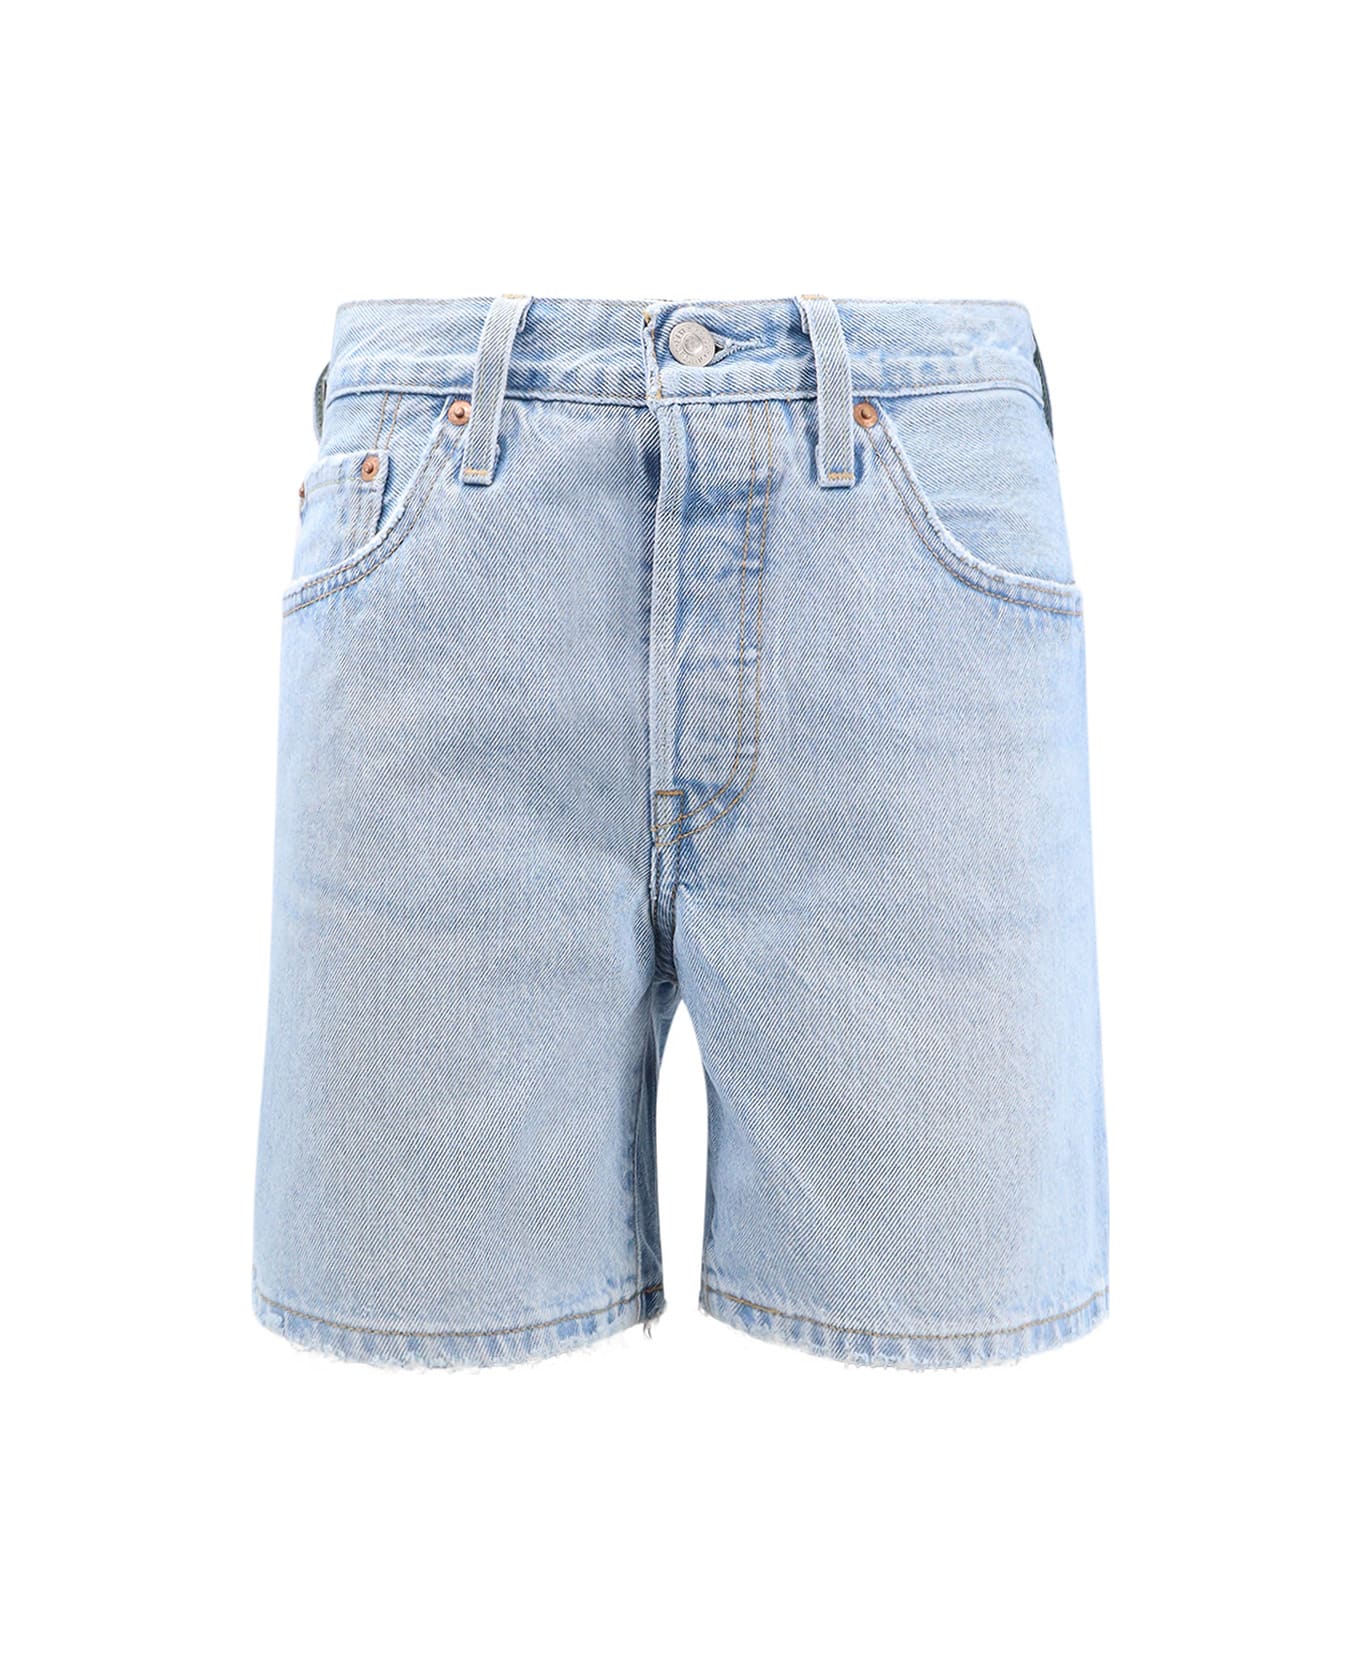 Levi's Shorts - Clear Blue